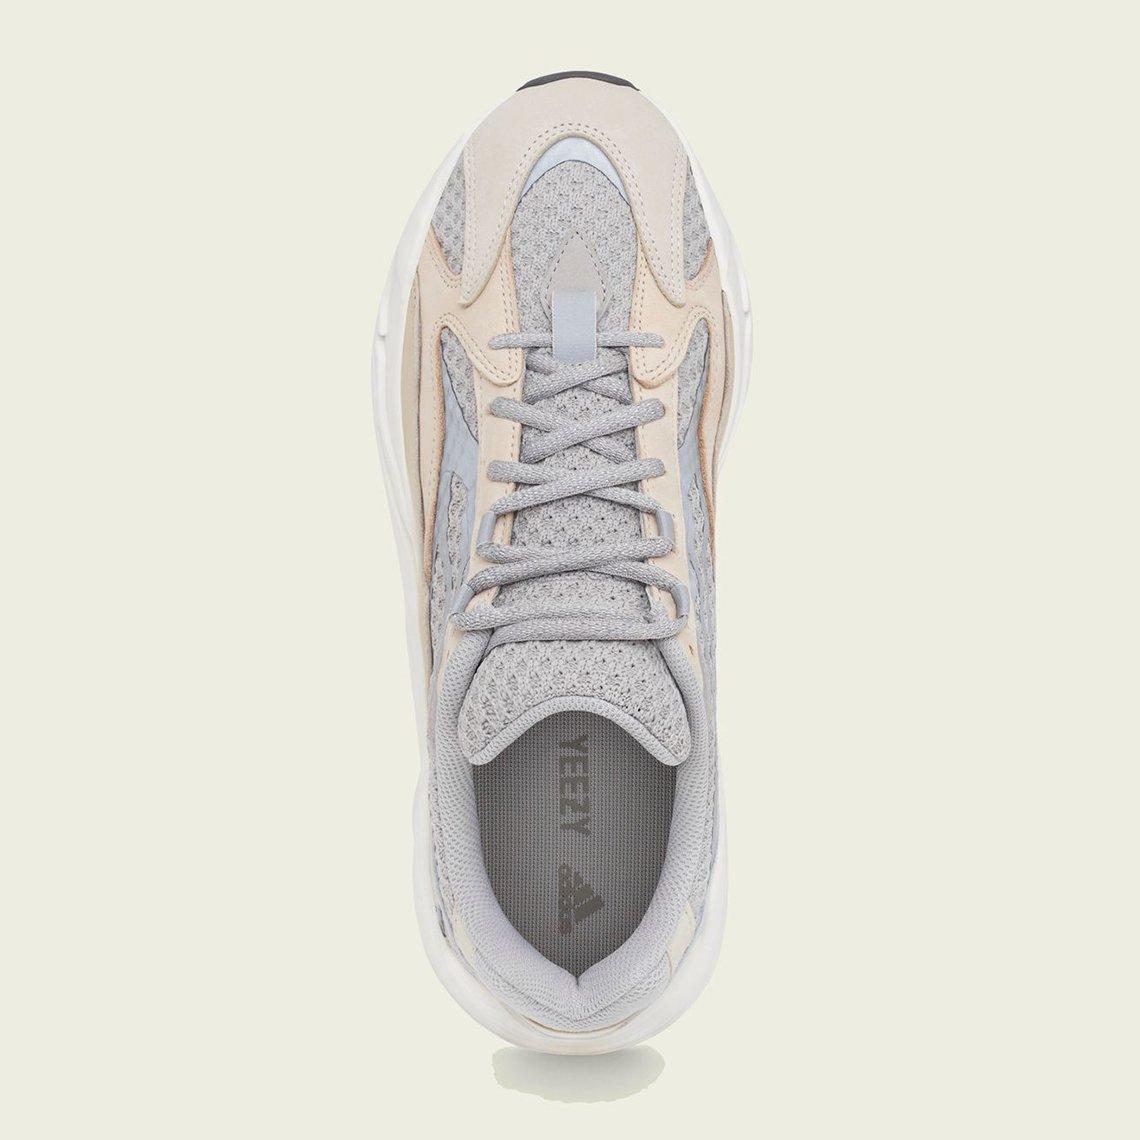 Adidas Yeezy Boost 700 V2 Cream Gy7924 Release Date 2